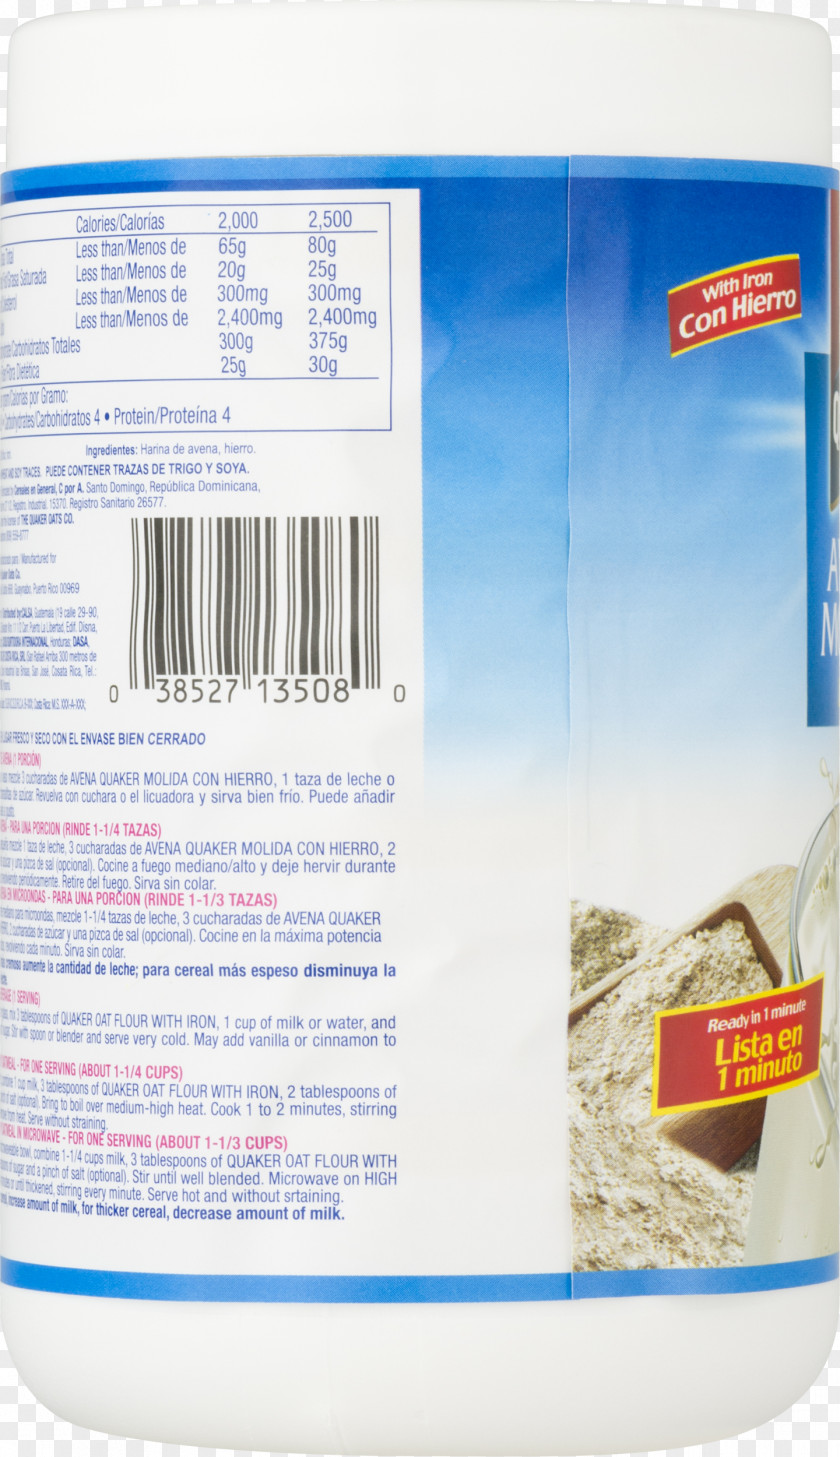 Crepe Oats And Cinnamon Quaker Company Nutrient Nutrition Facts Label PNG